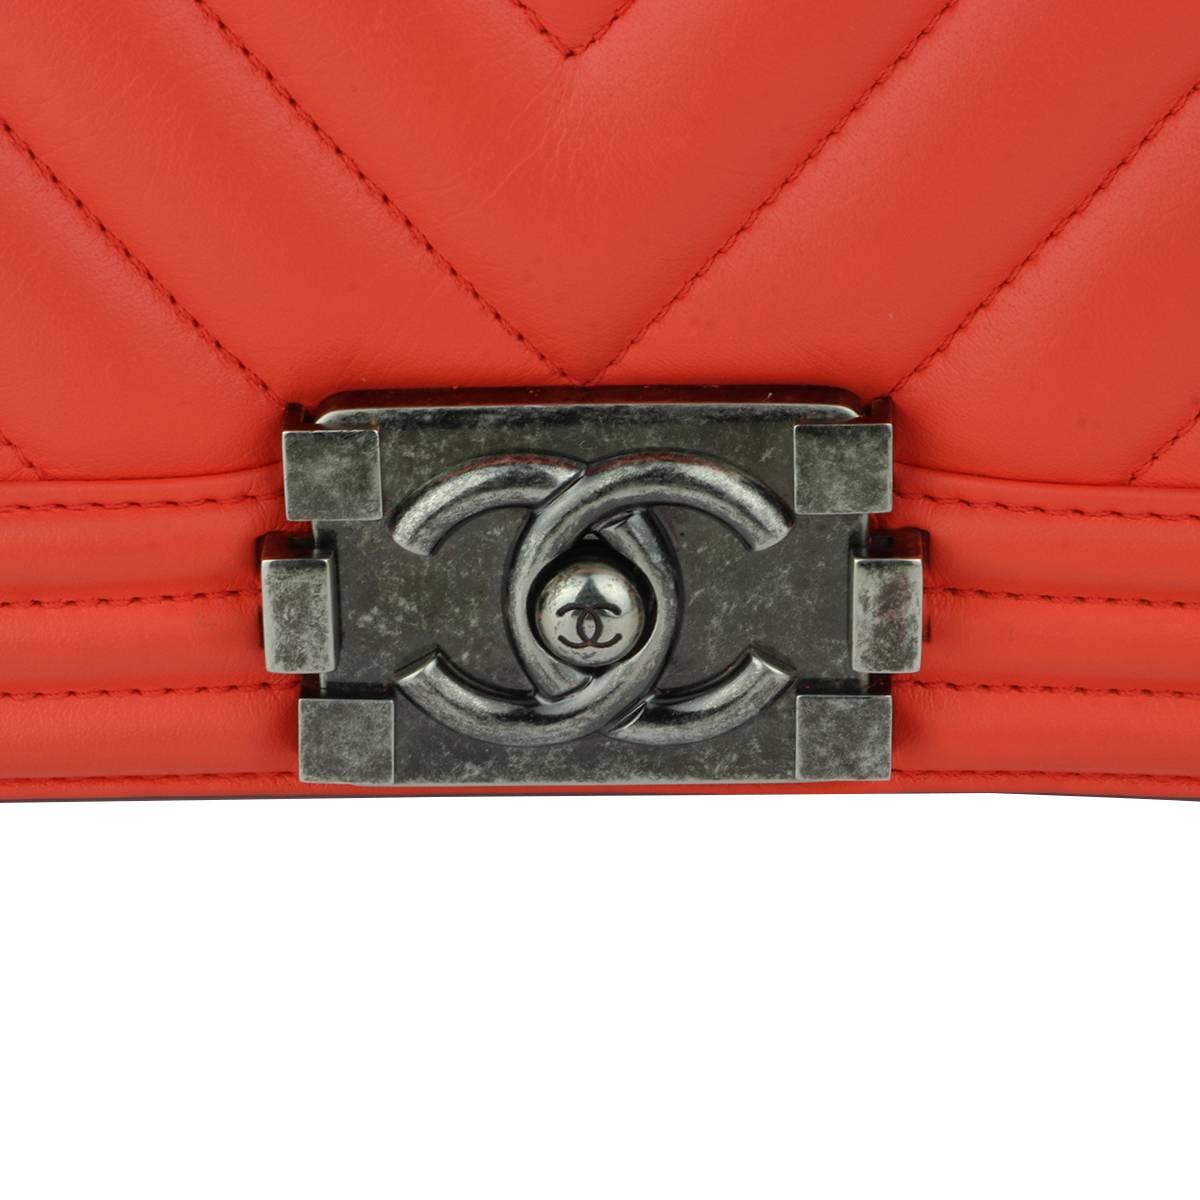 Authentic Chanel Old Medium Peachy Red Chevron LeBoy Calfskin with Ruthenium Hardware 2016.

This stunning bag is still in a mint condition, the bag still holds its original shape, and the hardware is still very clean and shiny. Calfskin leather